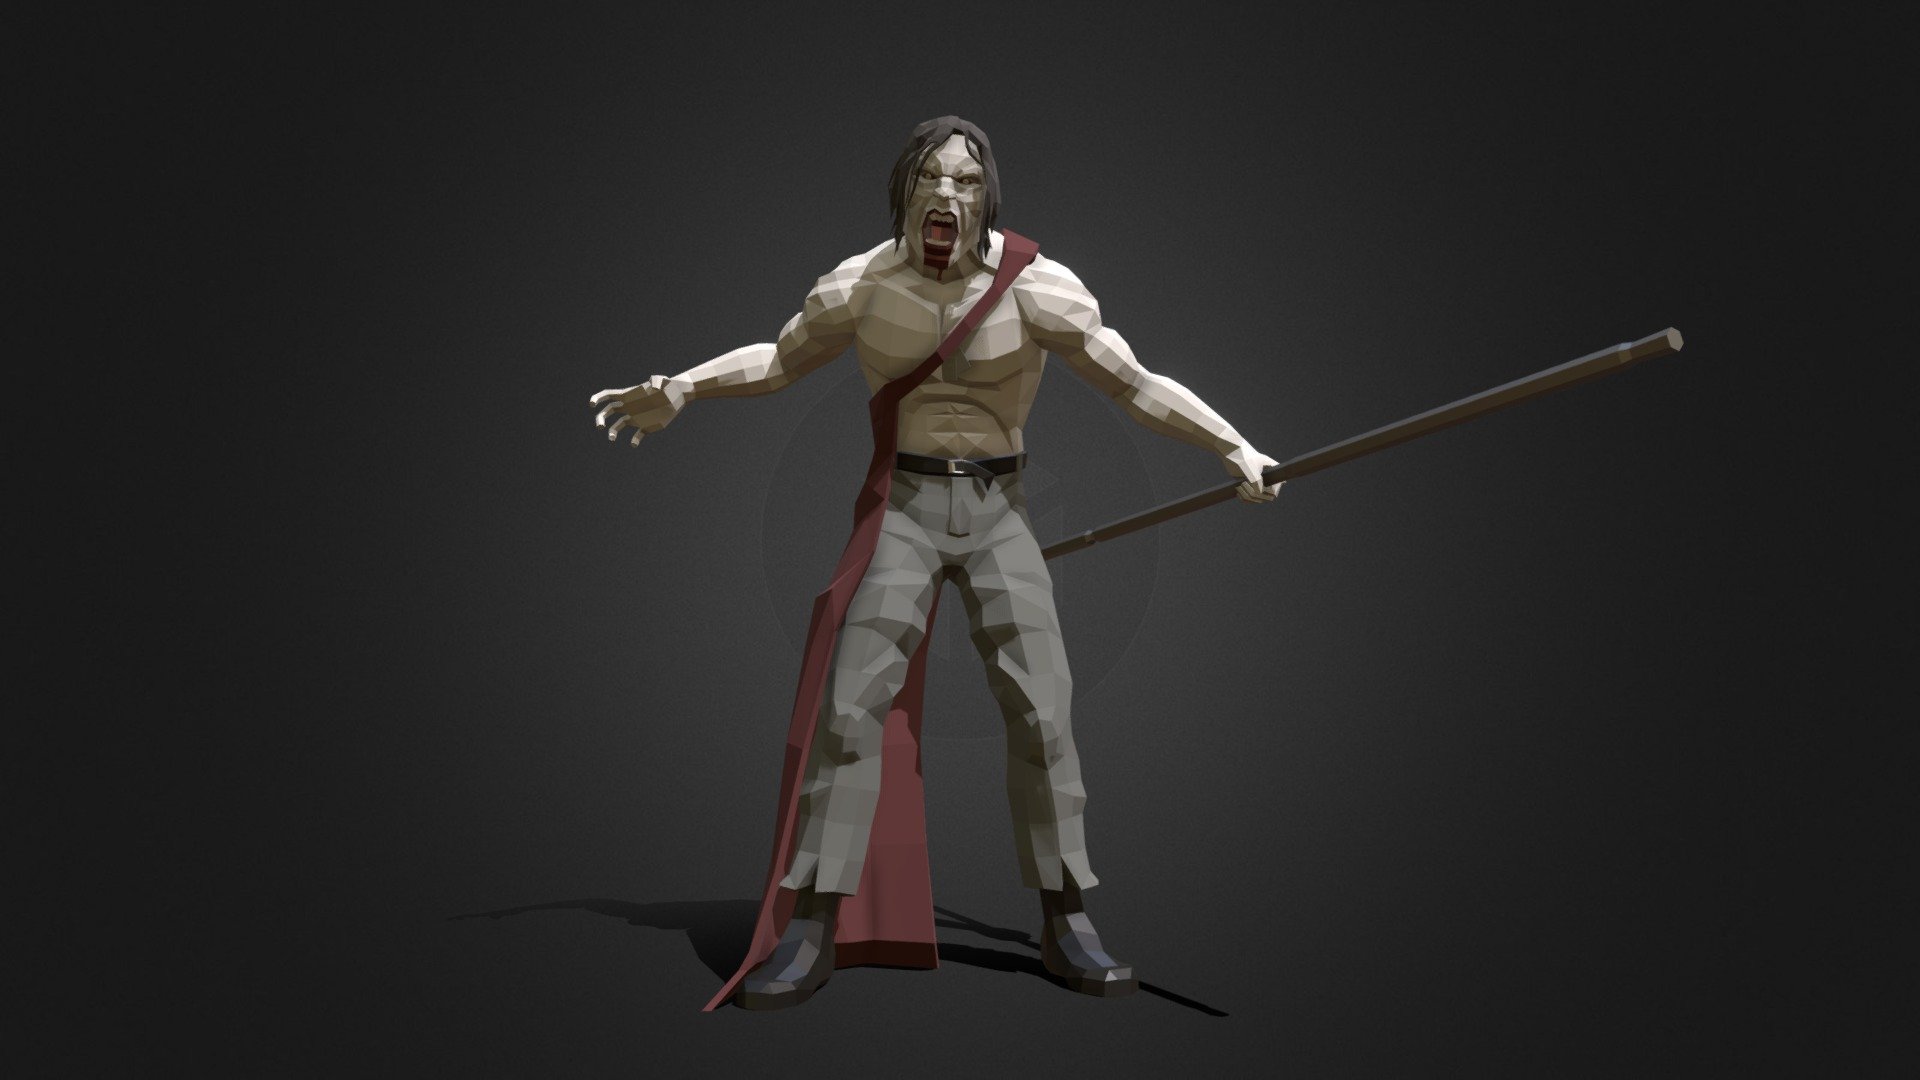 The zombie king of Army of the Dead, Zeus, as portrayed by Richard Cetrone. This is the eleventh character in my Armyverse series 3d model